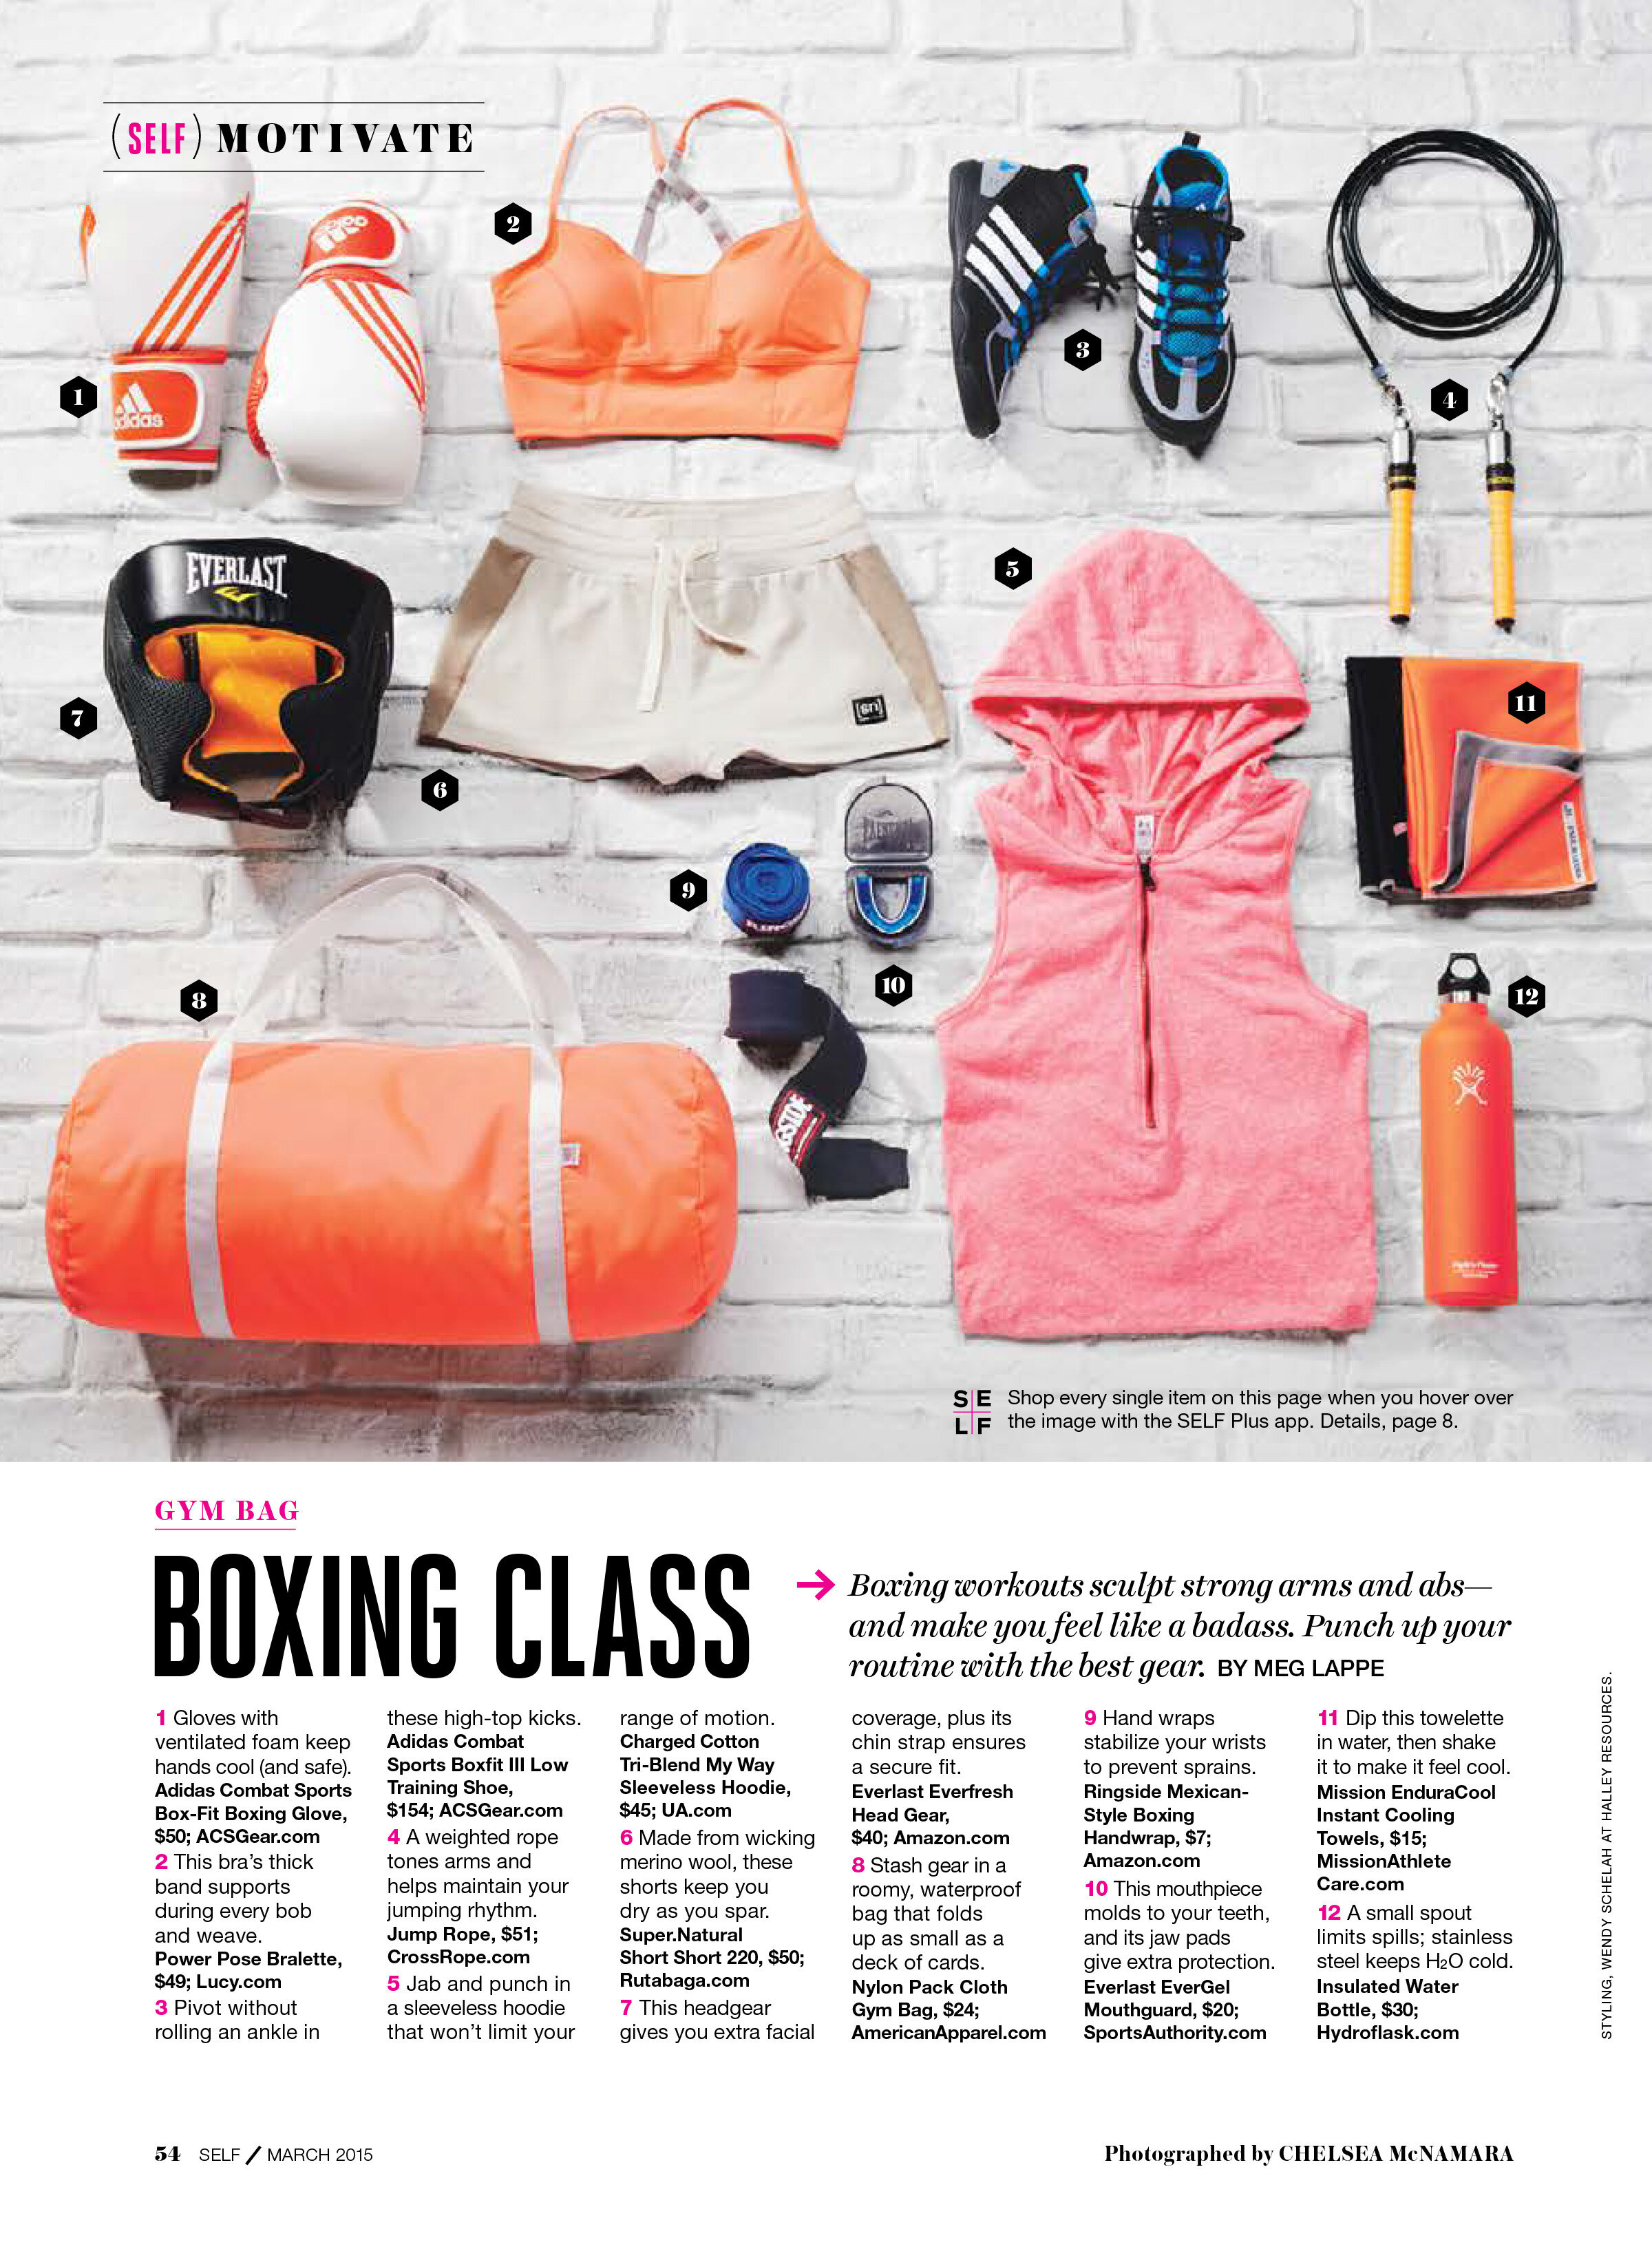   Themed gym bag series for  SELF .   Photography:   Chelsea McNamara ;  prop styling:  Wendy Schelah.  